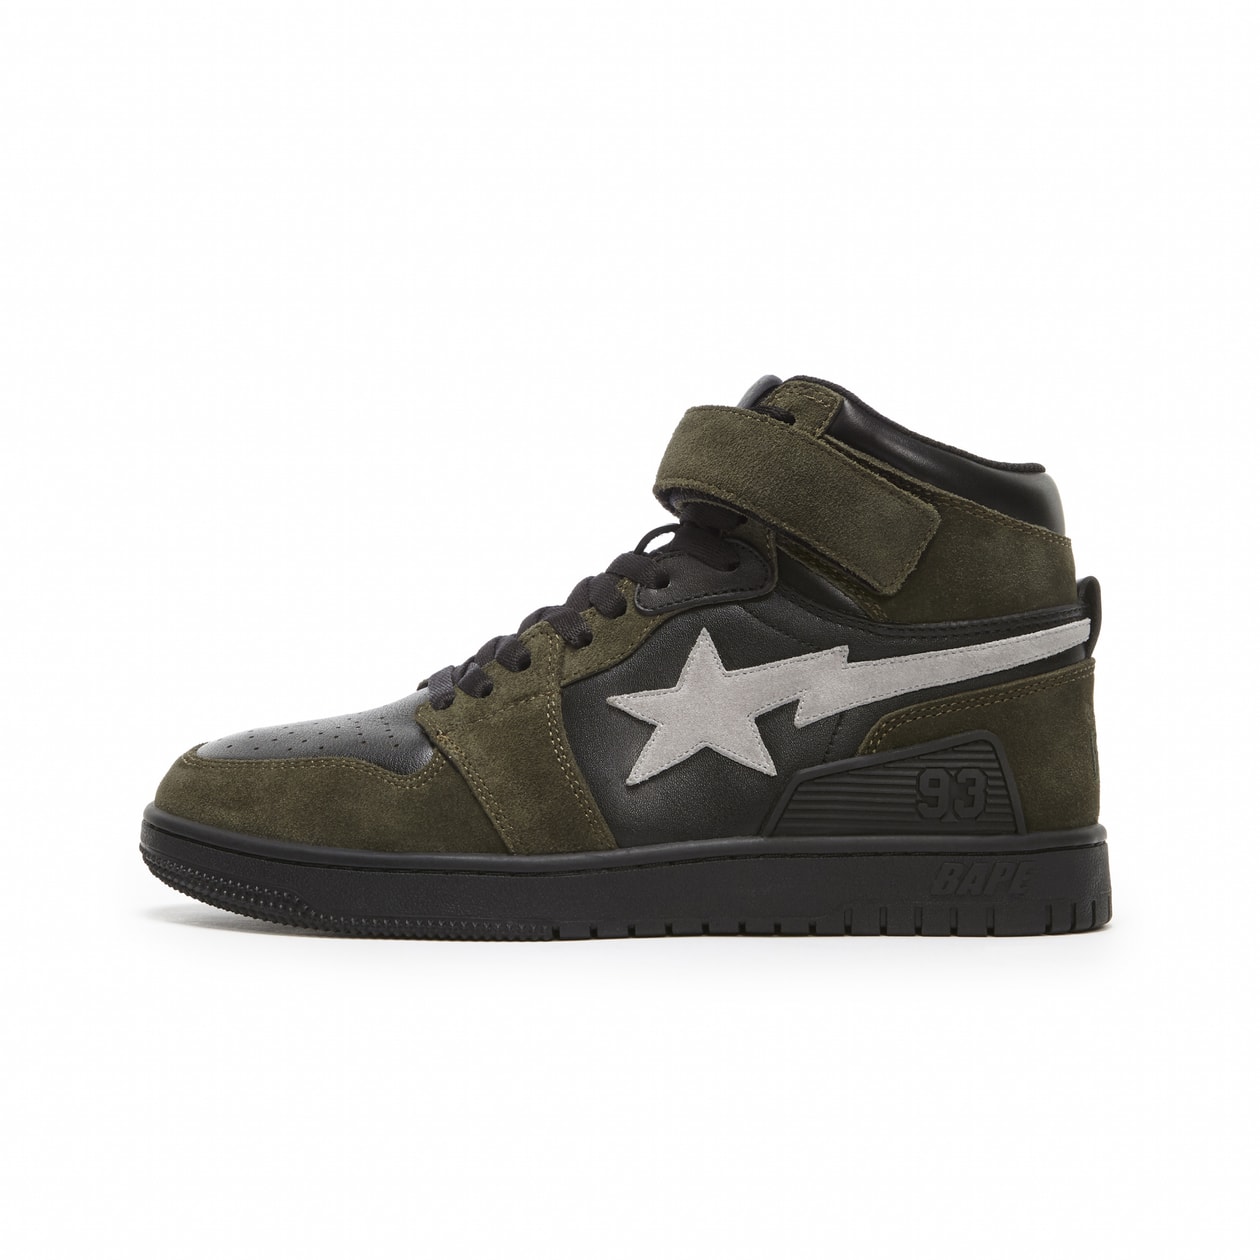 The BAPE STA Doubles Down on New Models This Spring